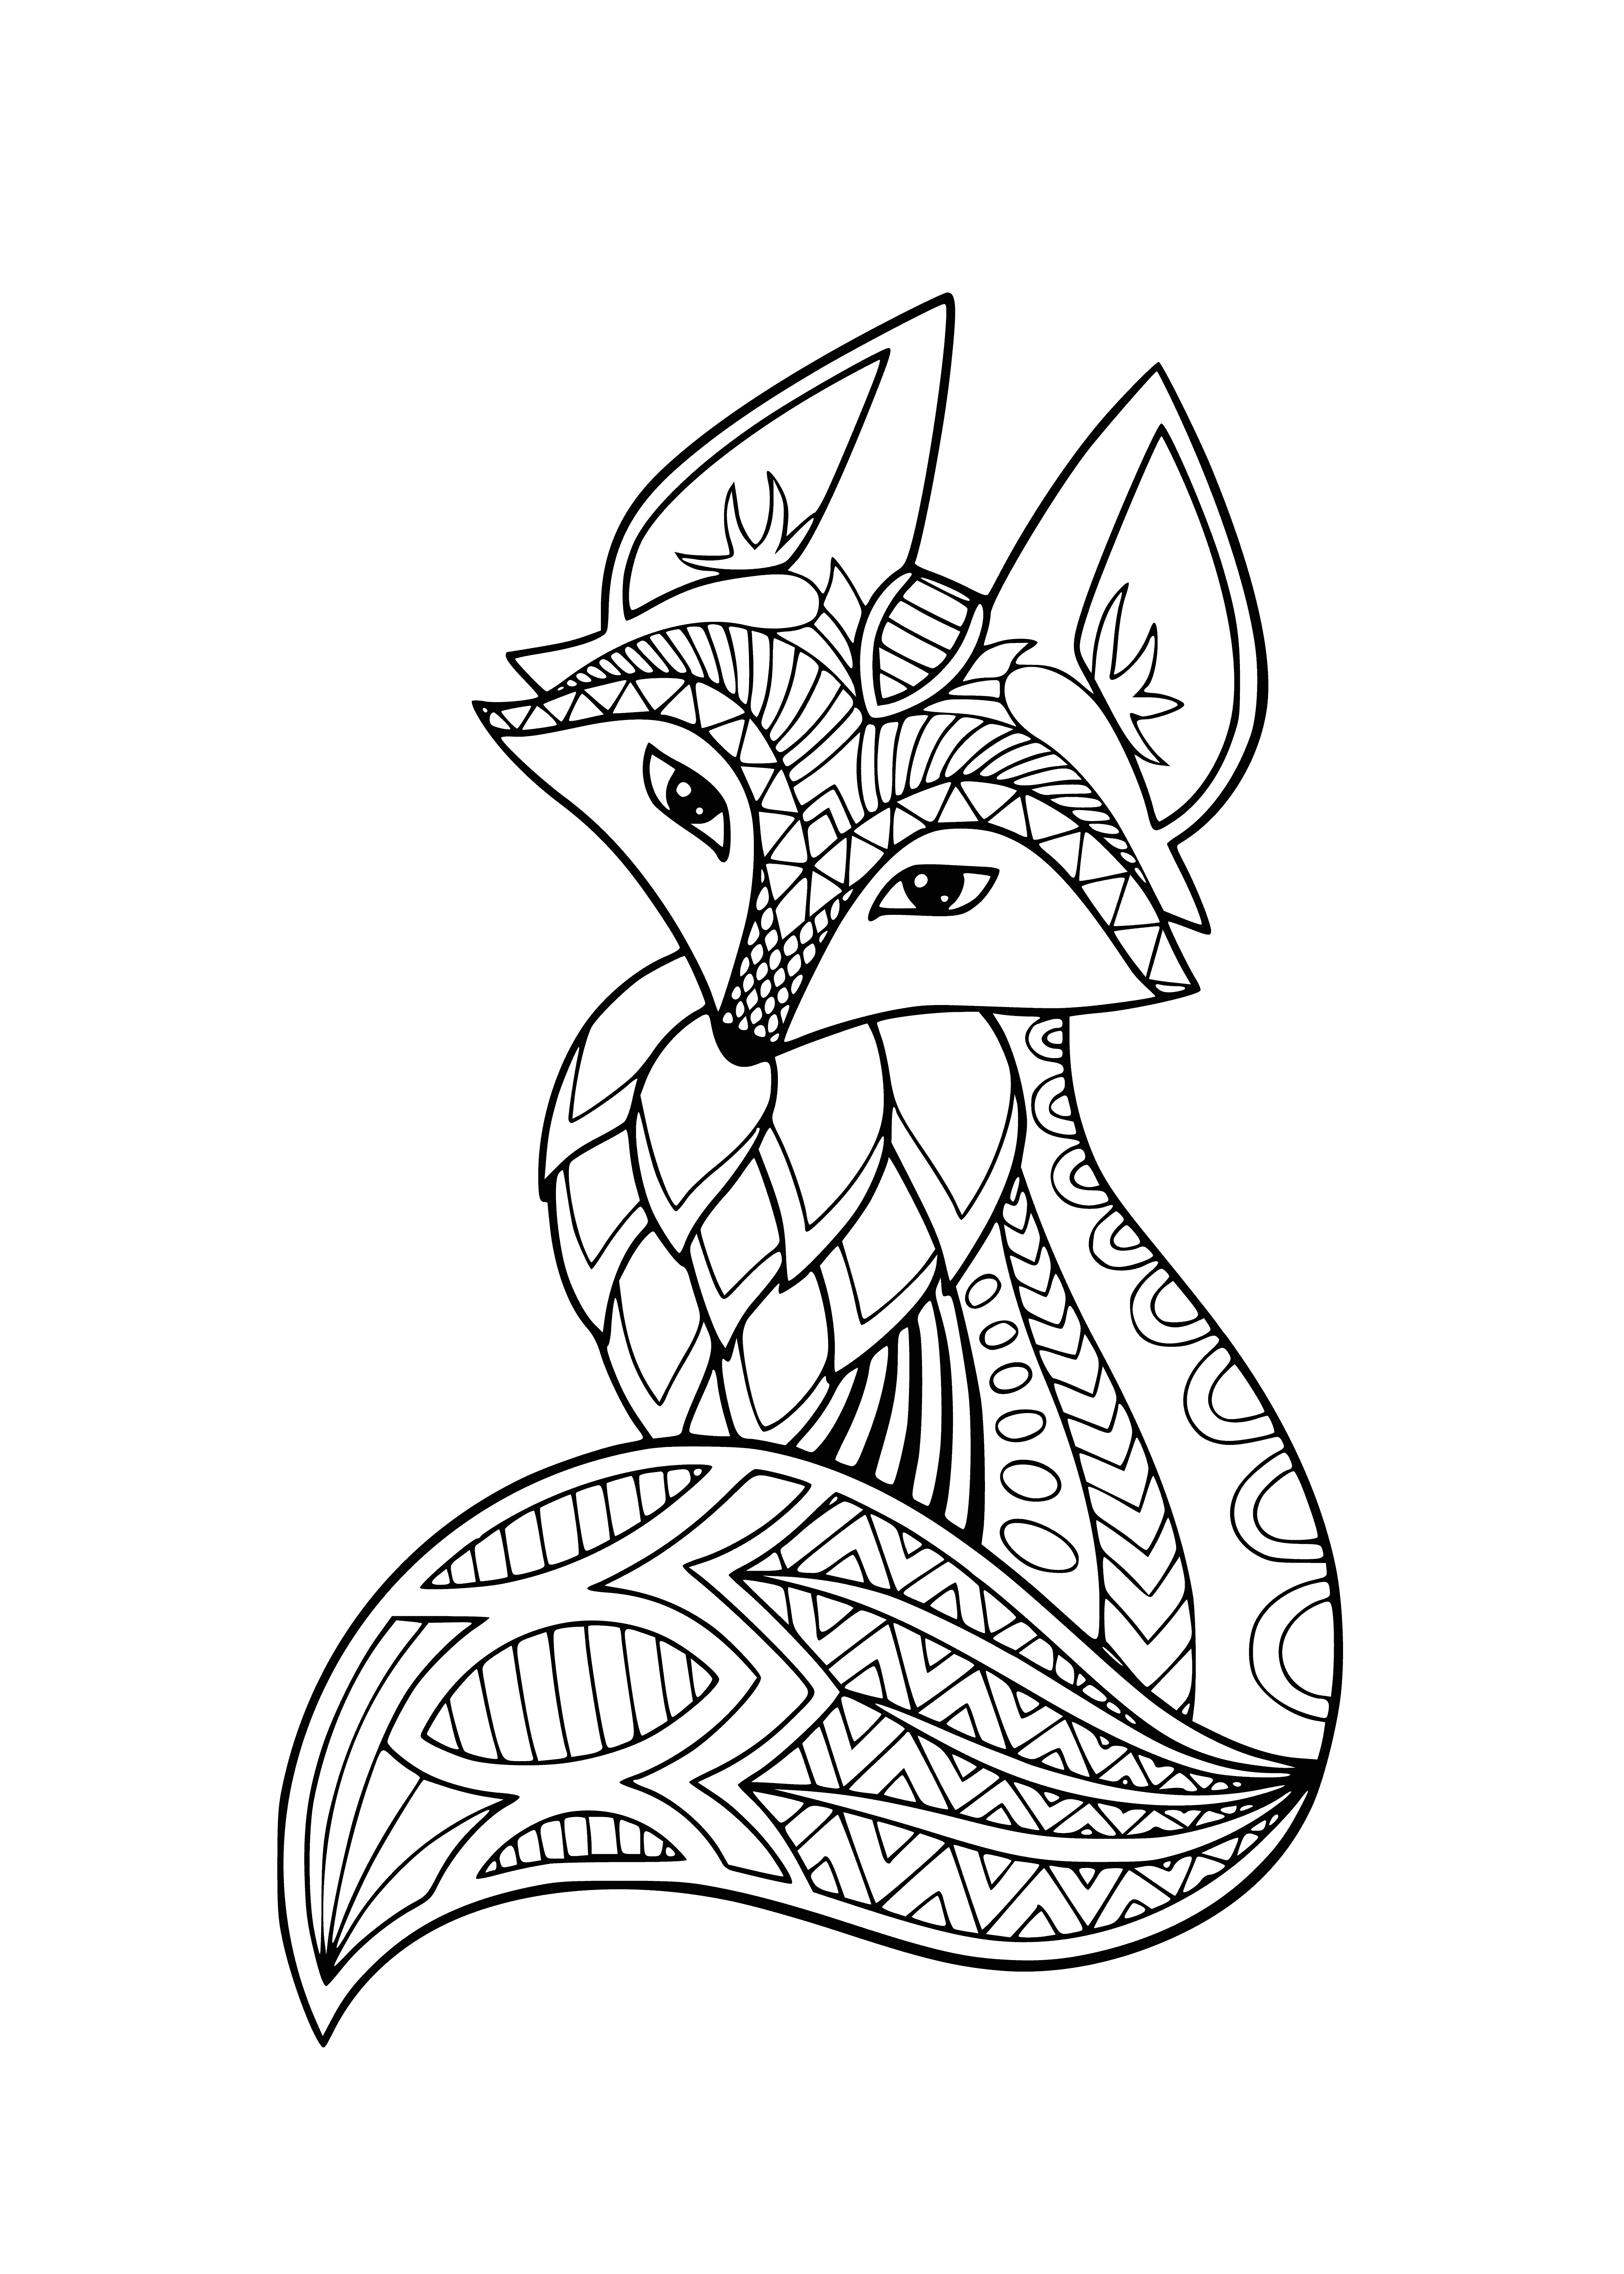 Sweet fox coloring page